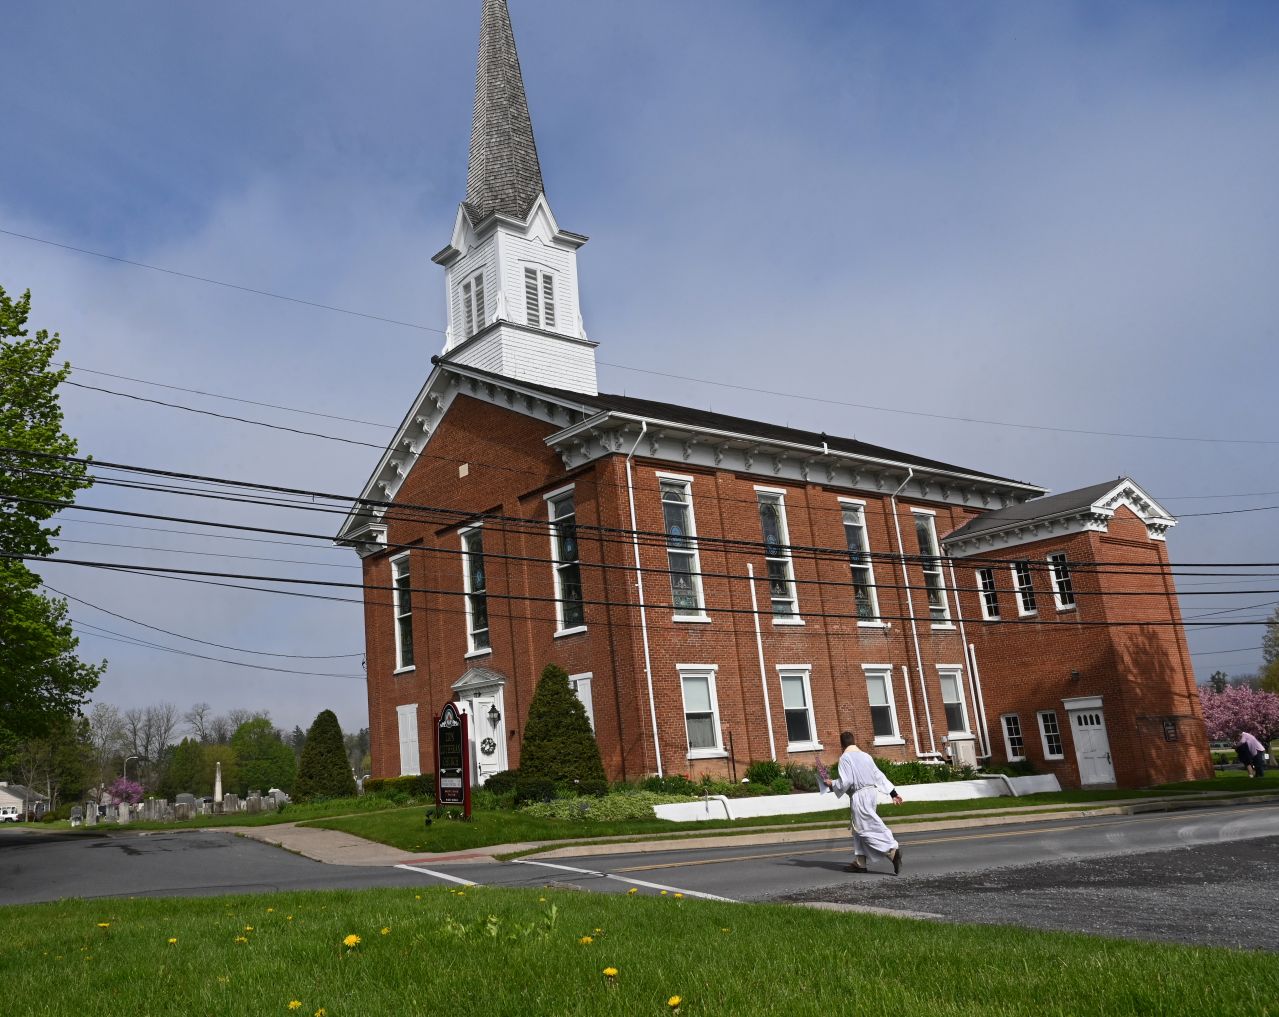 A man in a white robe approaches a two-story brick church.